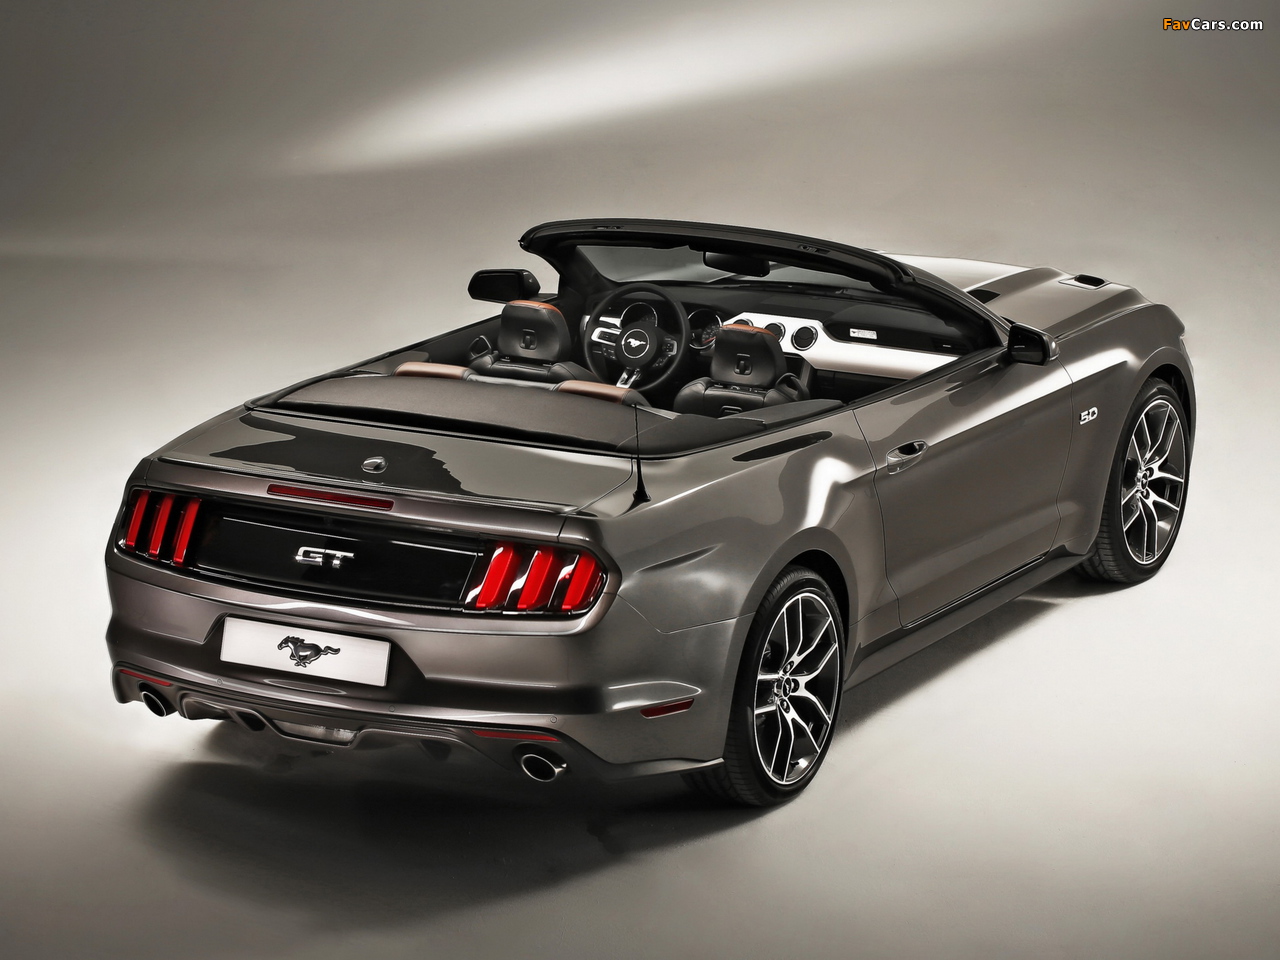 2015 Mustang GT Convertible 2014 images (1280 x 960)